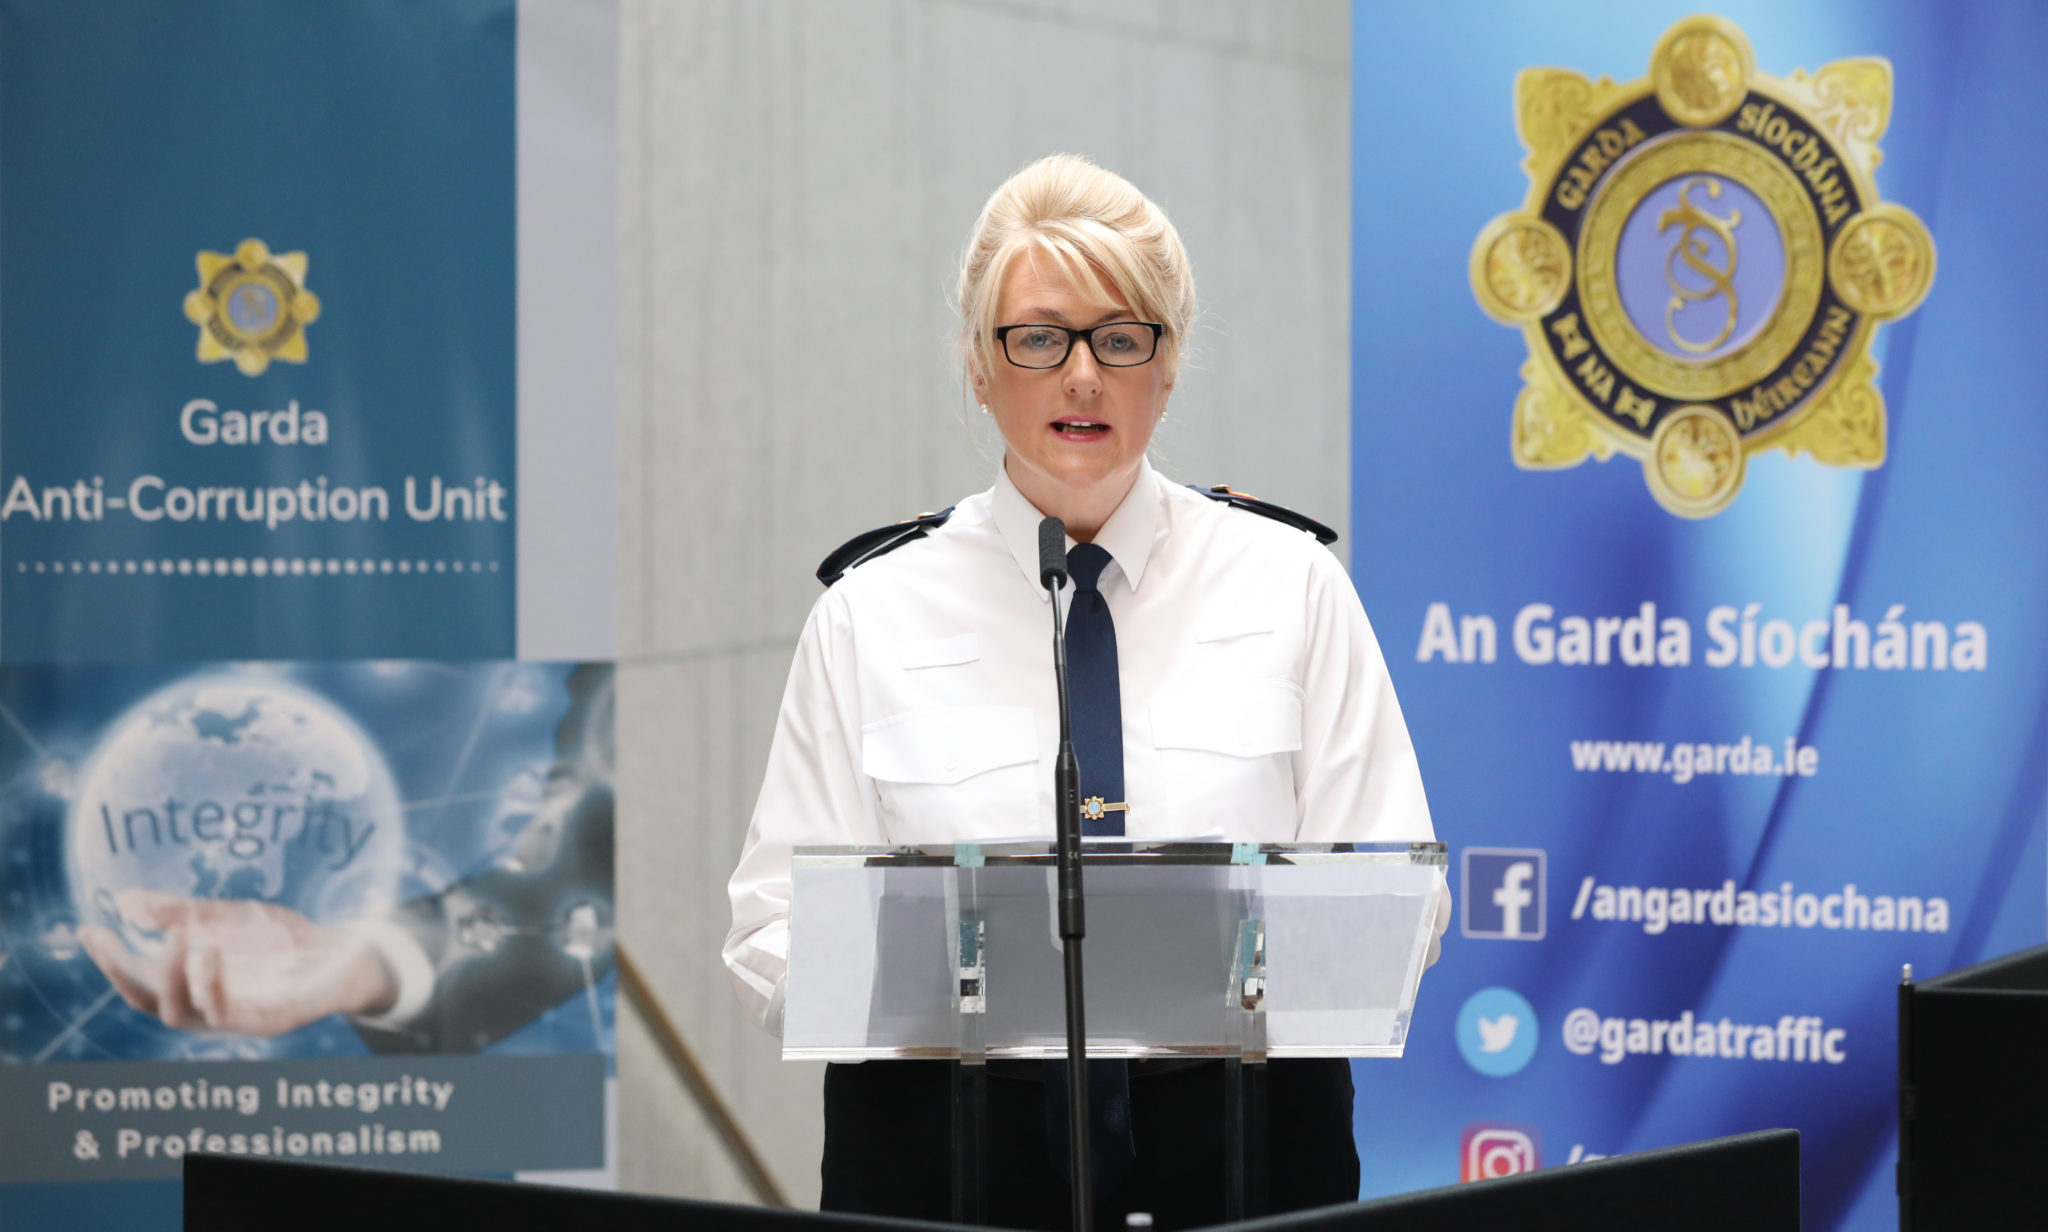 The head of the Garda Anti-Corruption Unit Chief Superintendent Johanna O’Leary in Kevin Street Garda Station